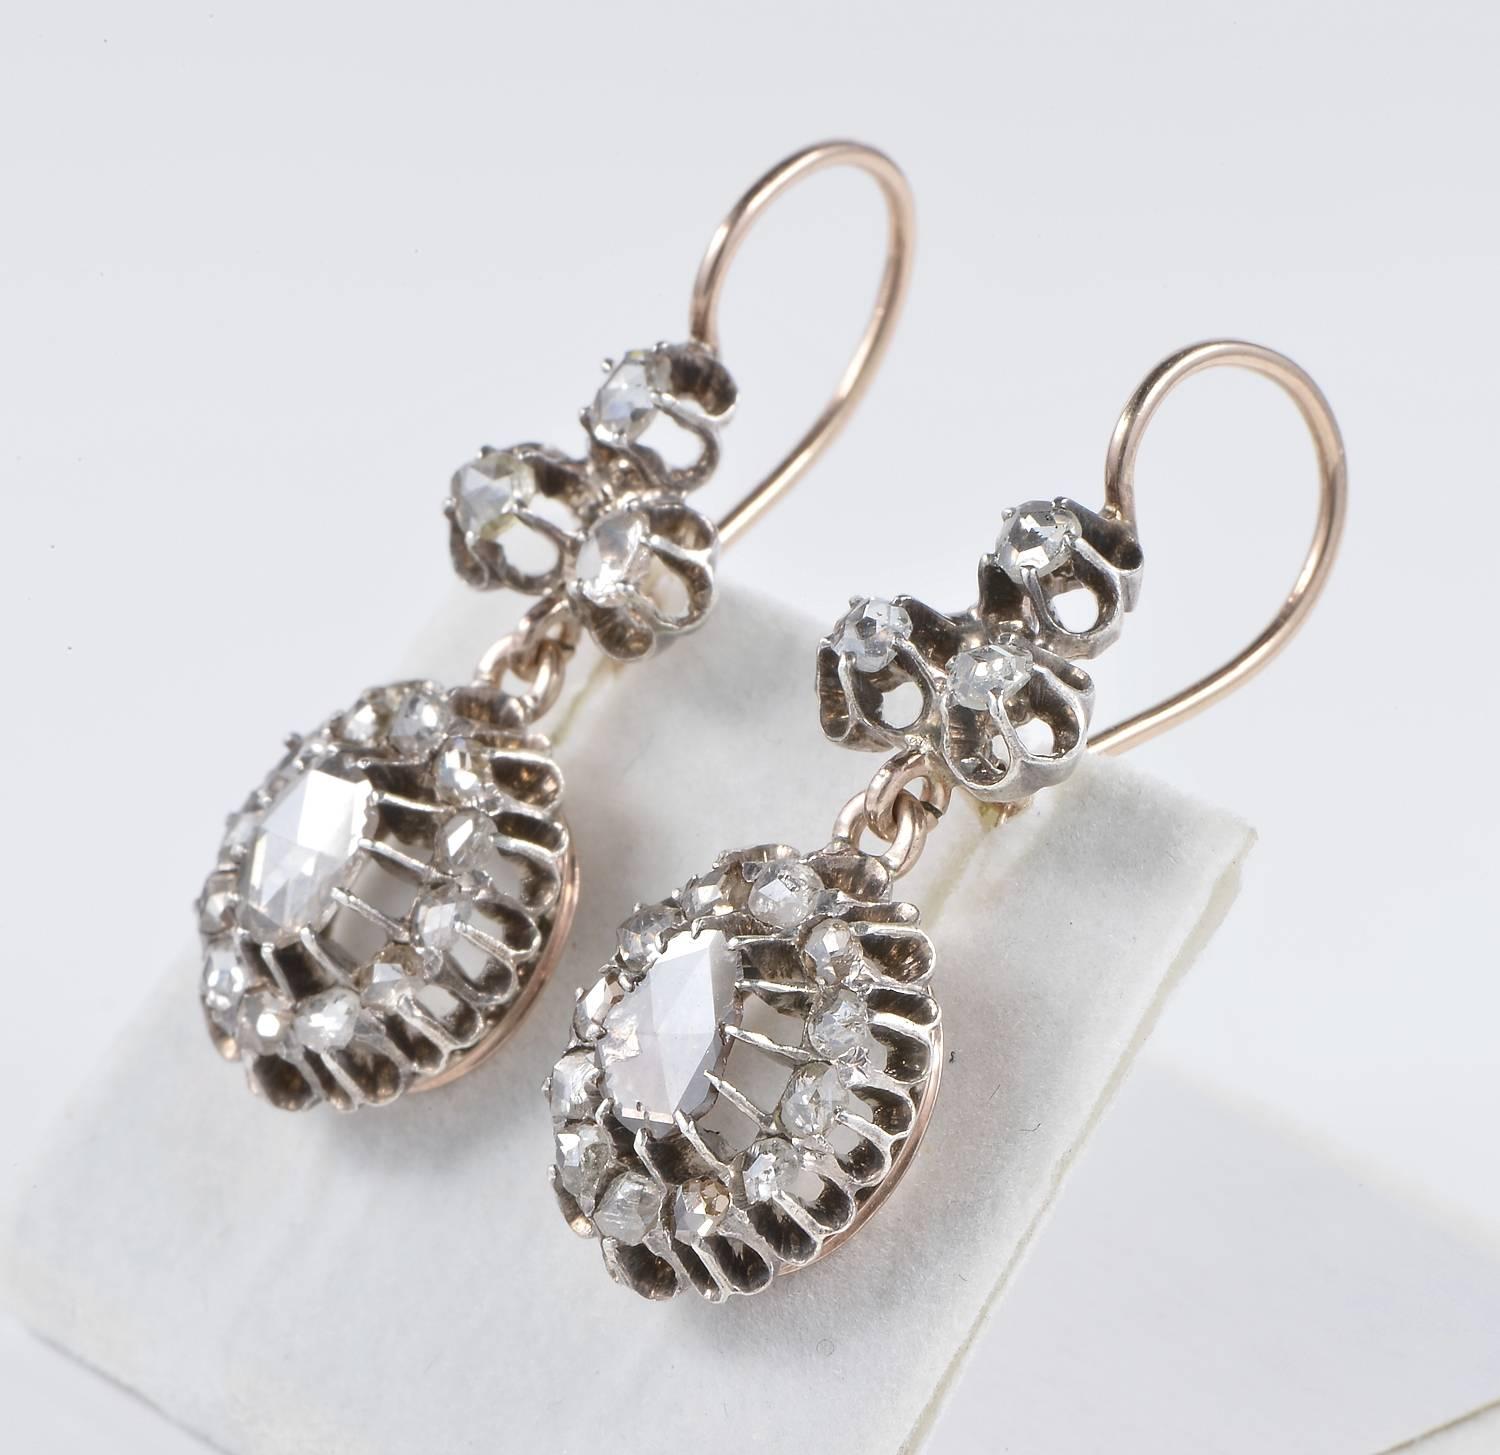 A terrific pair of authentic Georgian/early Victorian Diamond drop earrings.
Fabulous in design, glorious workmanship from the time.
Hand crafted of solid 18 kt rose gold and silver as for age.
Fully set with opulence of rose cut Diamonds of fine